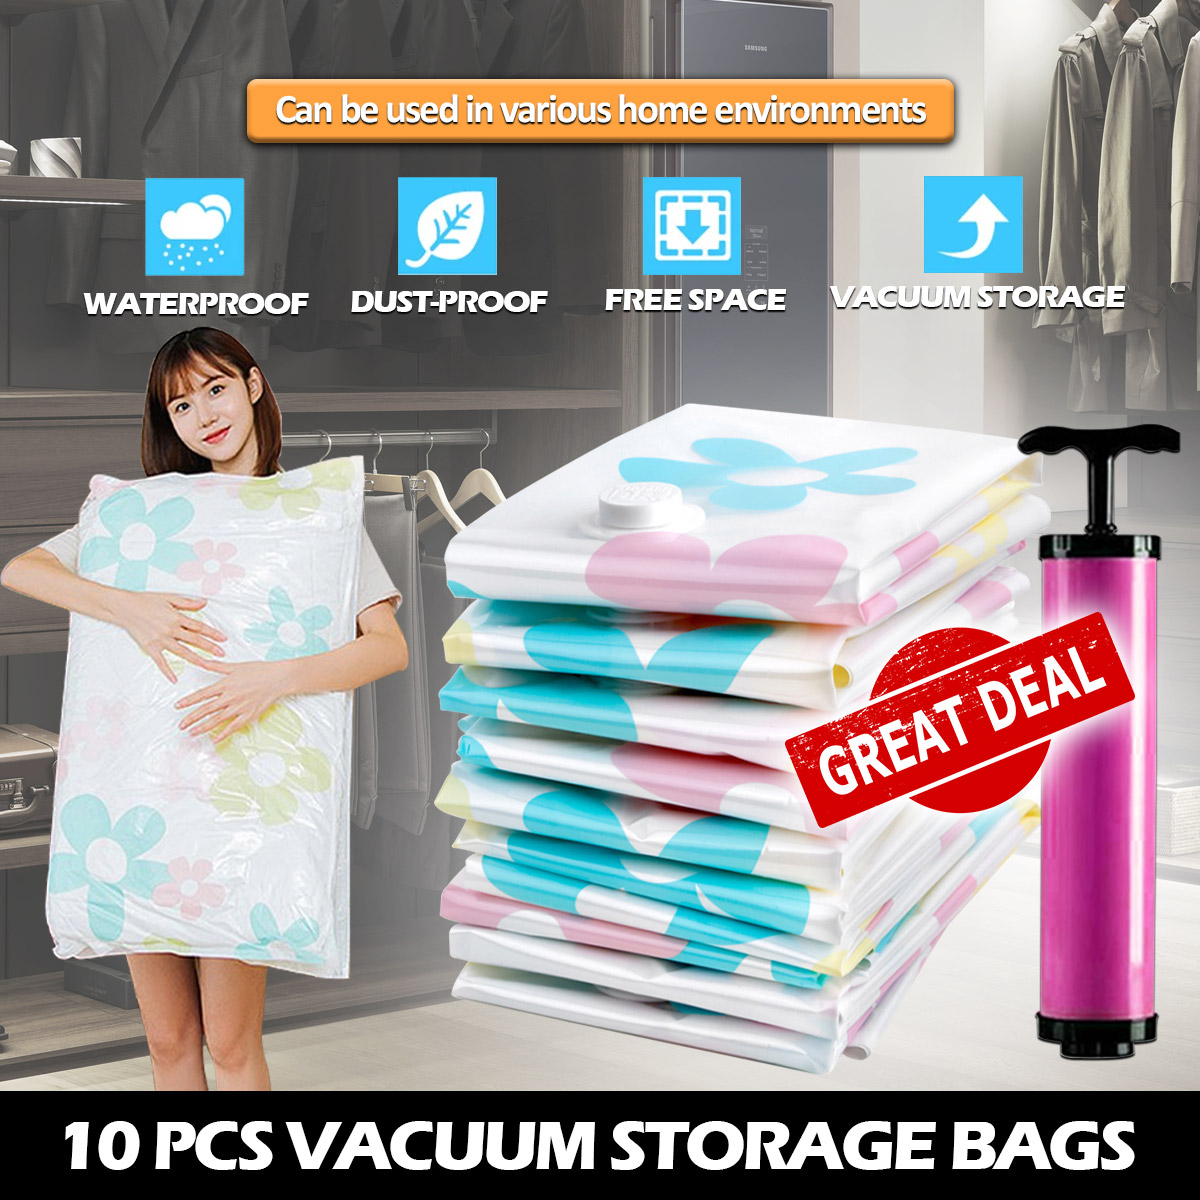 Coats Vacuum Storage Bags 10 Pcs 2 Large 1 Extra Large Save 80% Storage Space for Clothing 3 Medium+4 Small Duvets Blankets Free Hand Pump Provided Bedding 